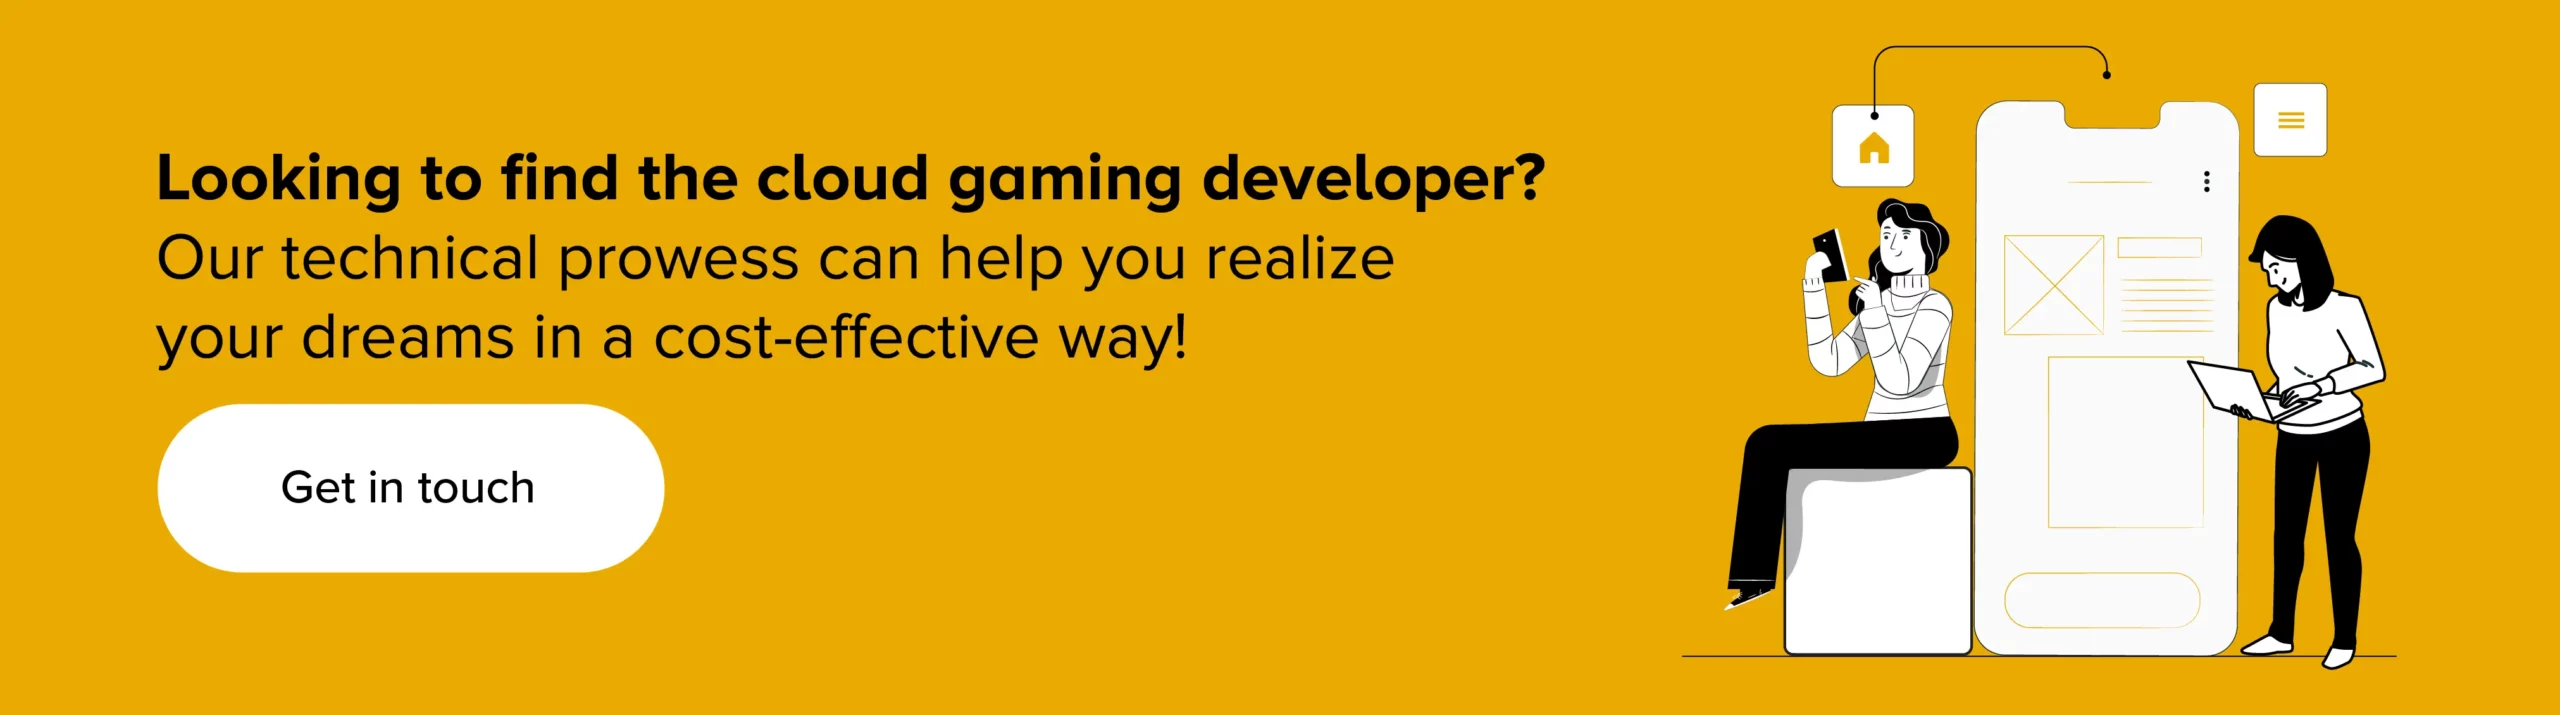 Contact our cloud gaming developers 